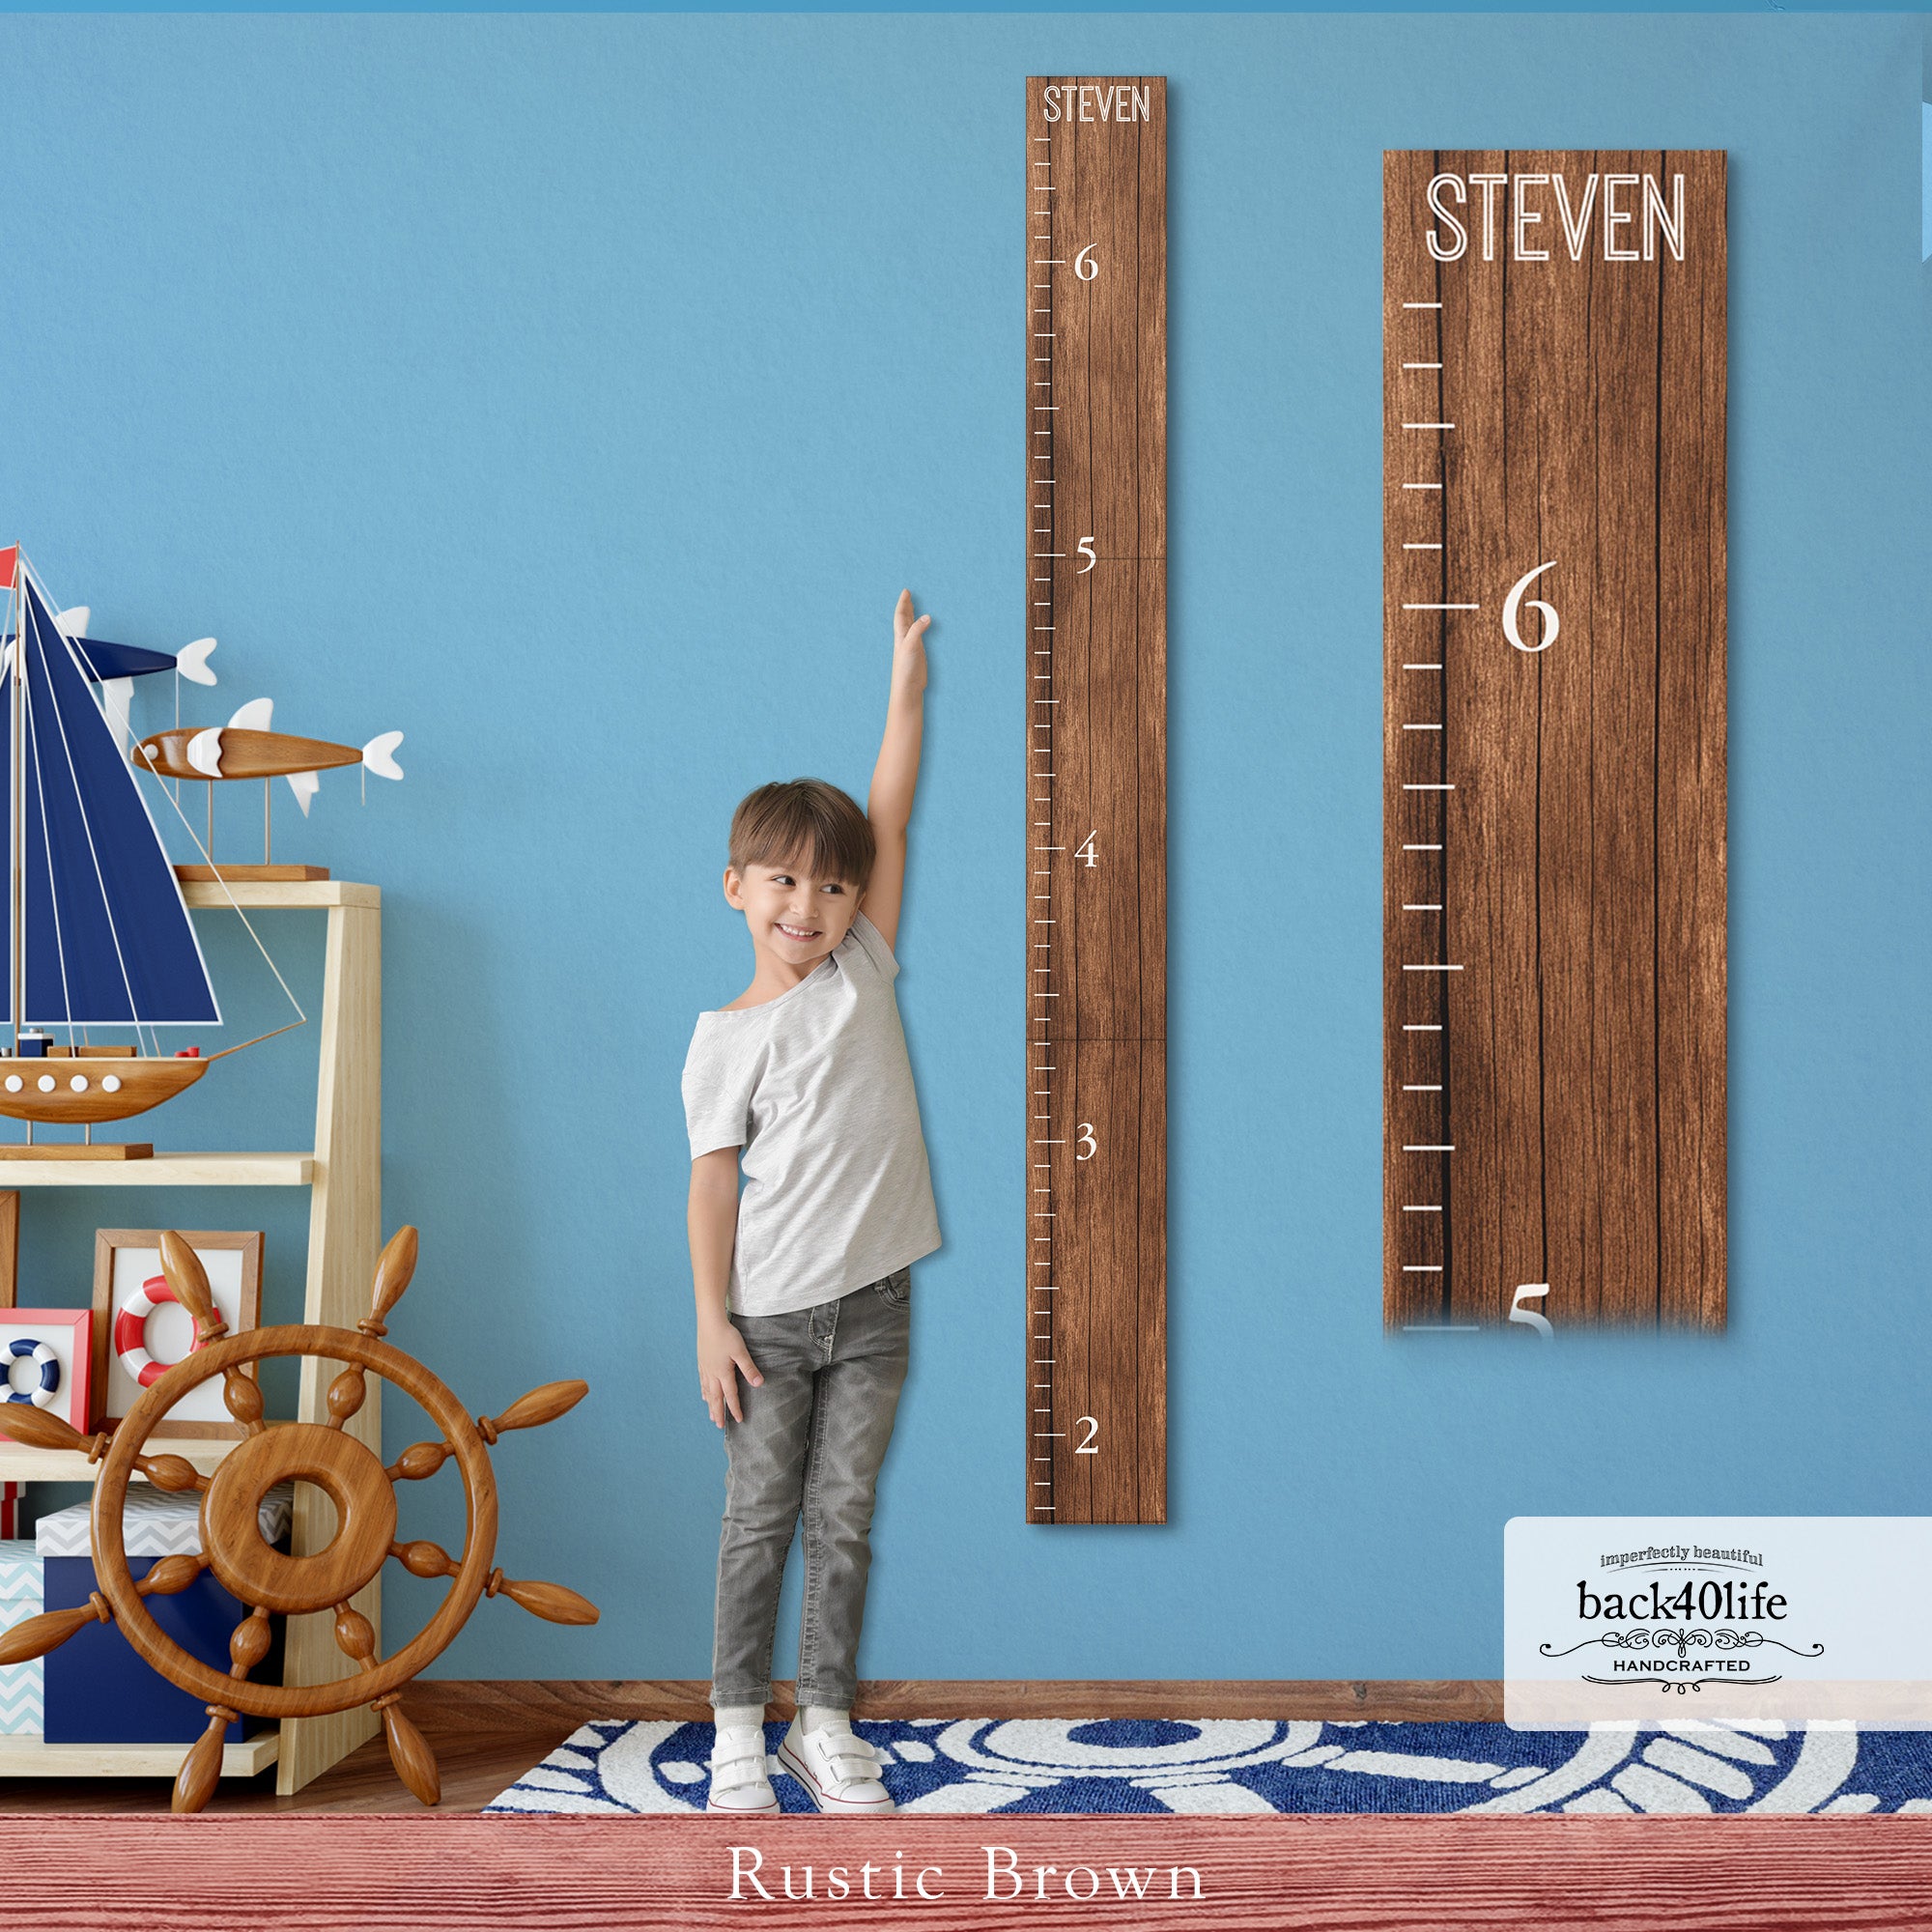 Farmhouse Style Segmented Wooden Kids Growth Chart Ruler for Boys and Girls (GC-3P-BMK) Benchmark - Back40Life